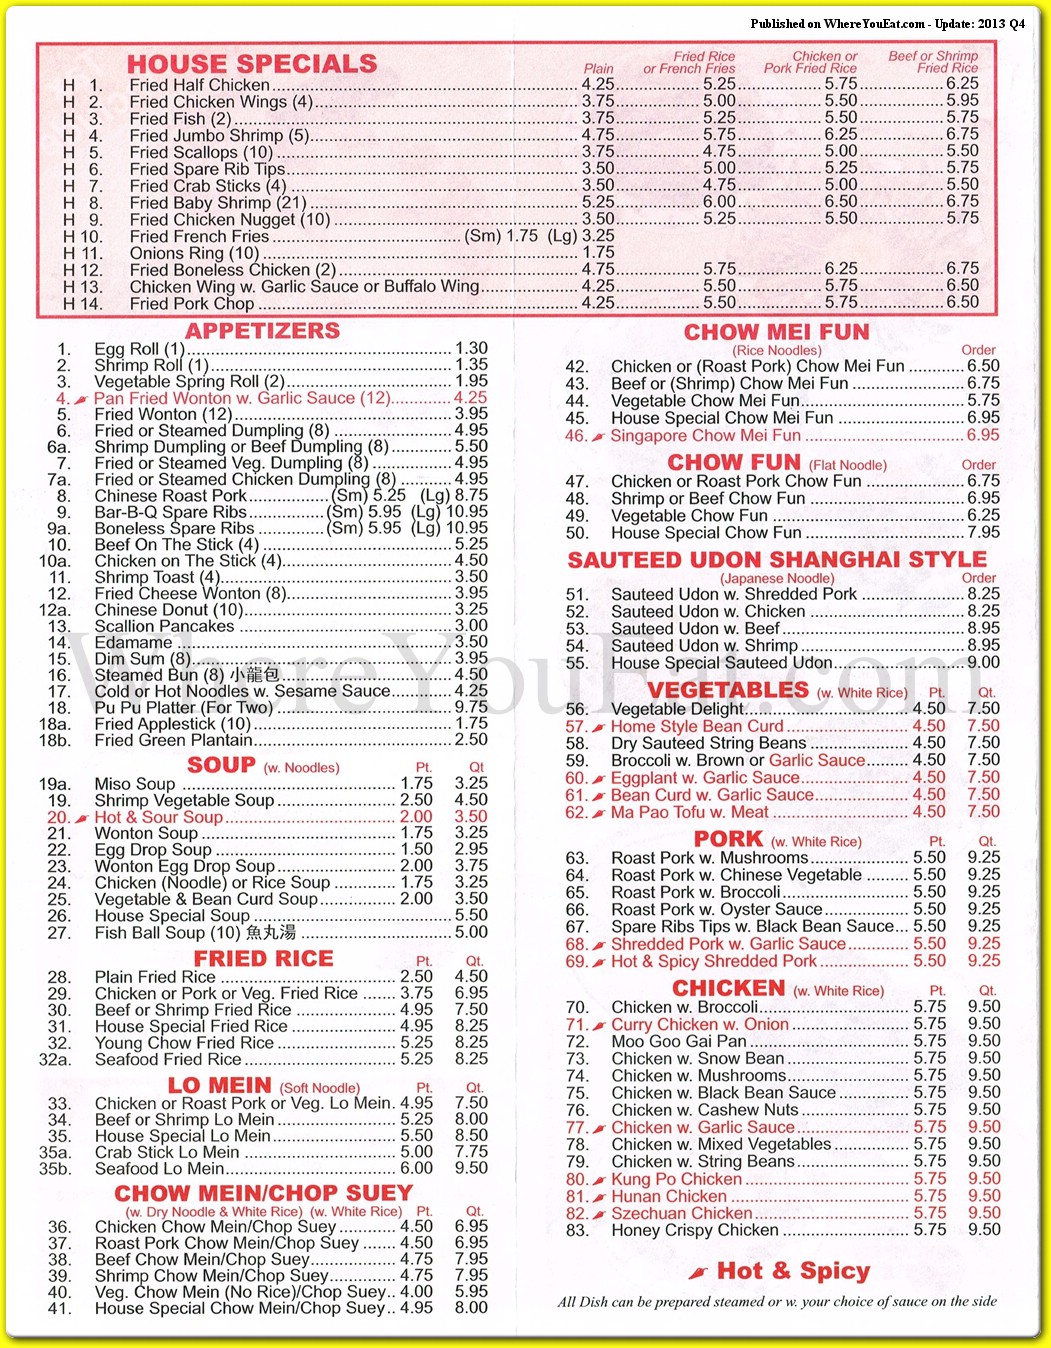 New China Kitchen Restaurant In Brooklyn Official Menus Photos